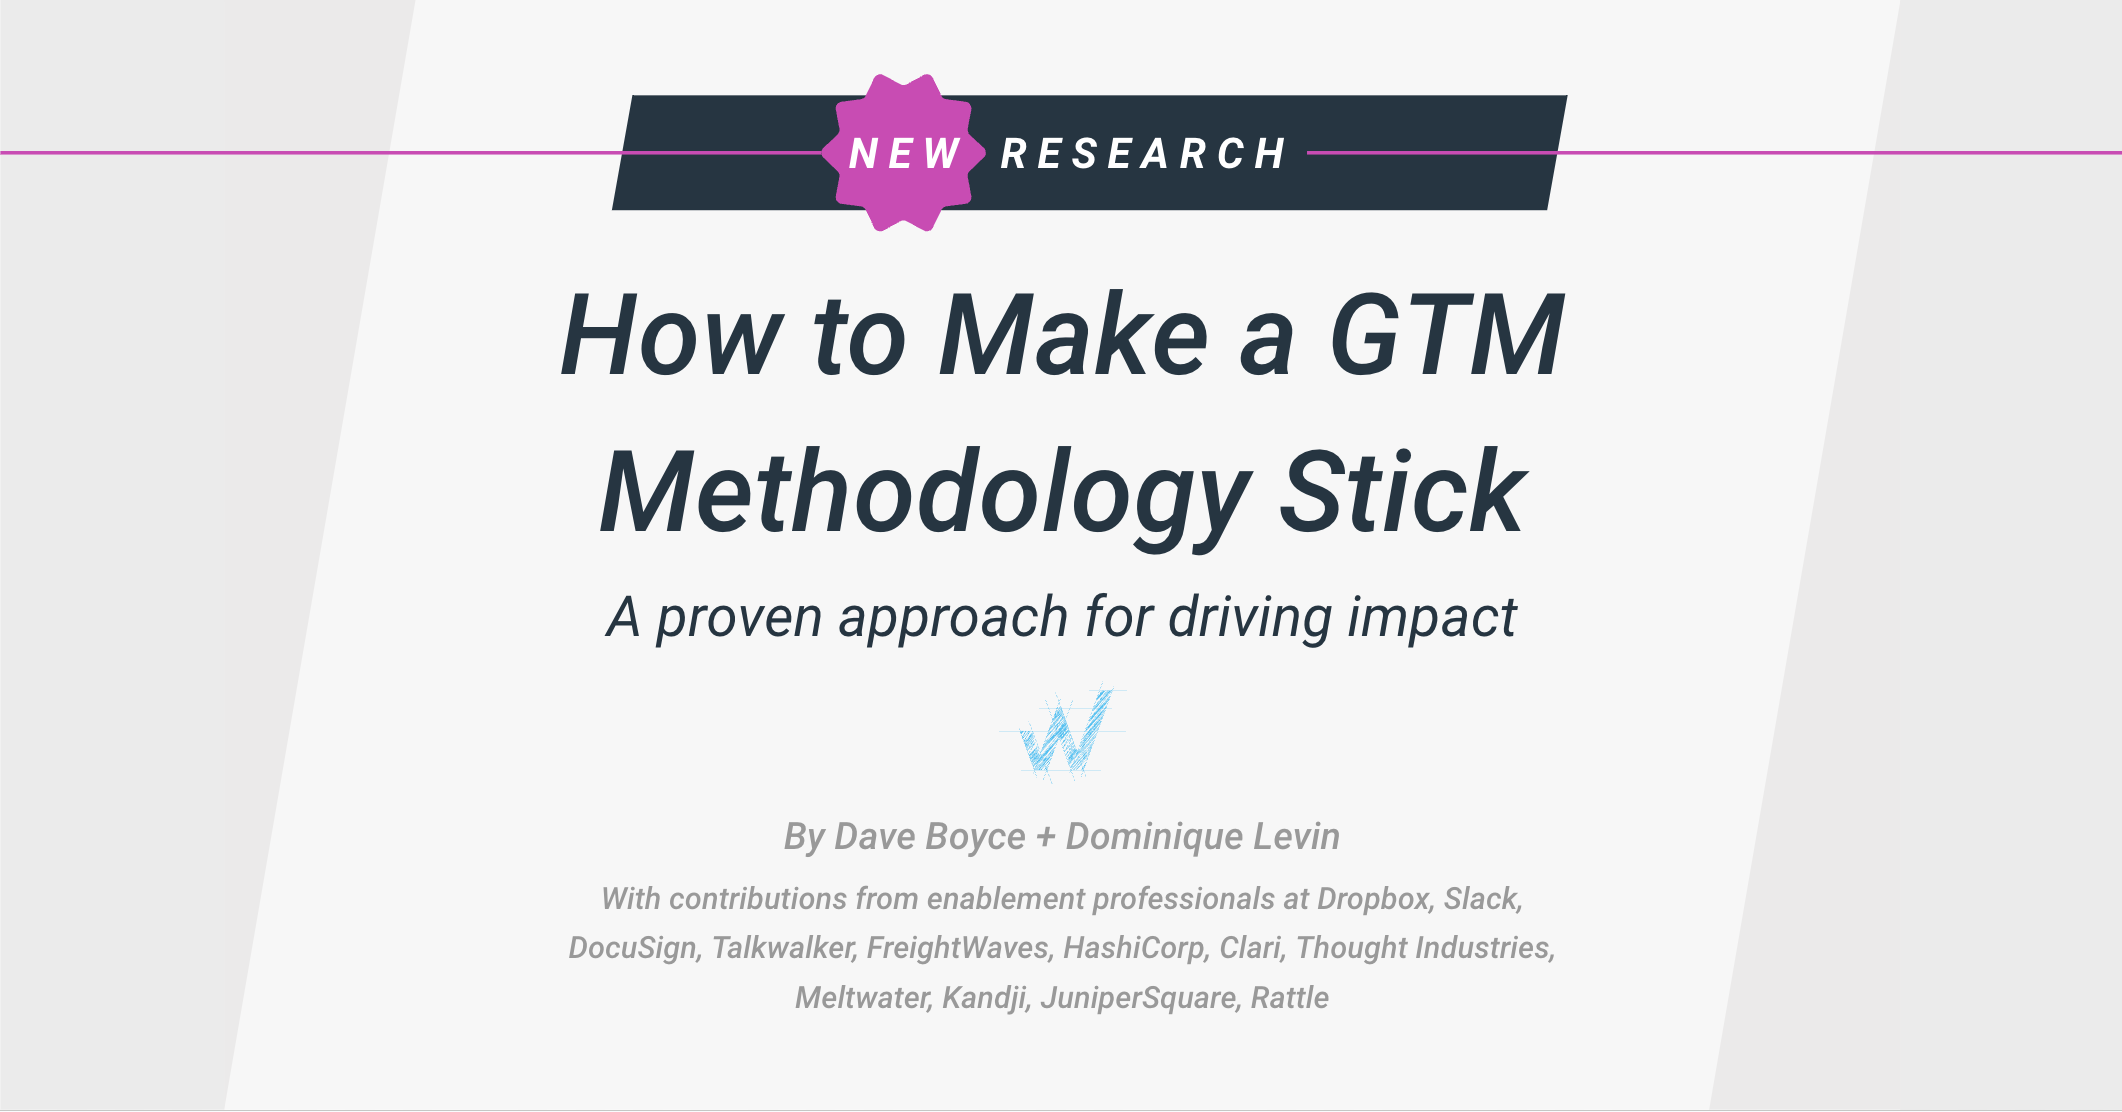 How to Make a GTM Methodology Stick